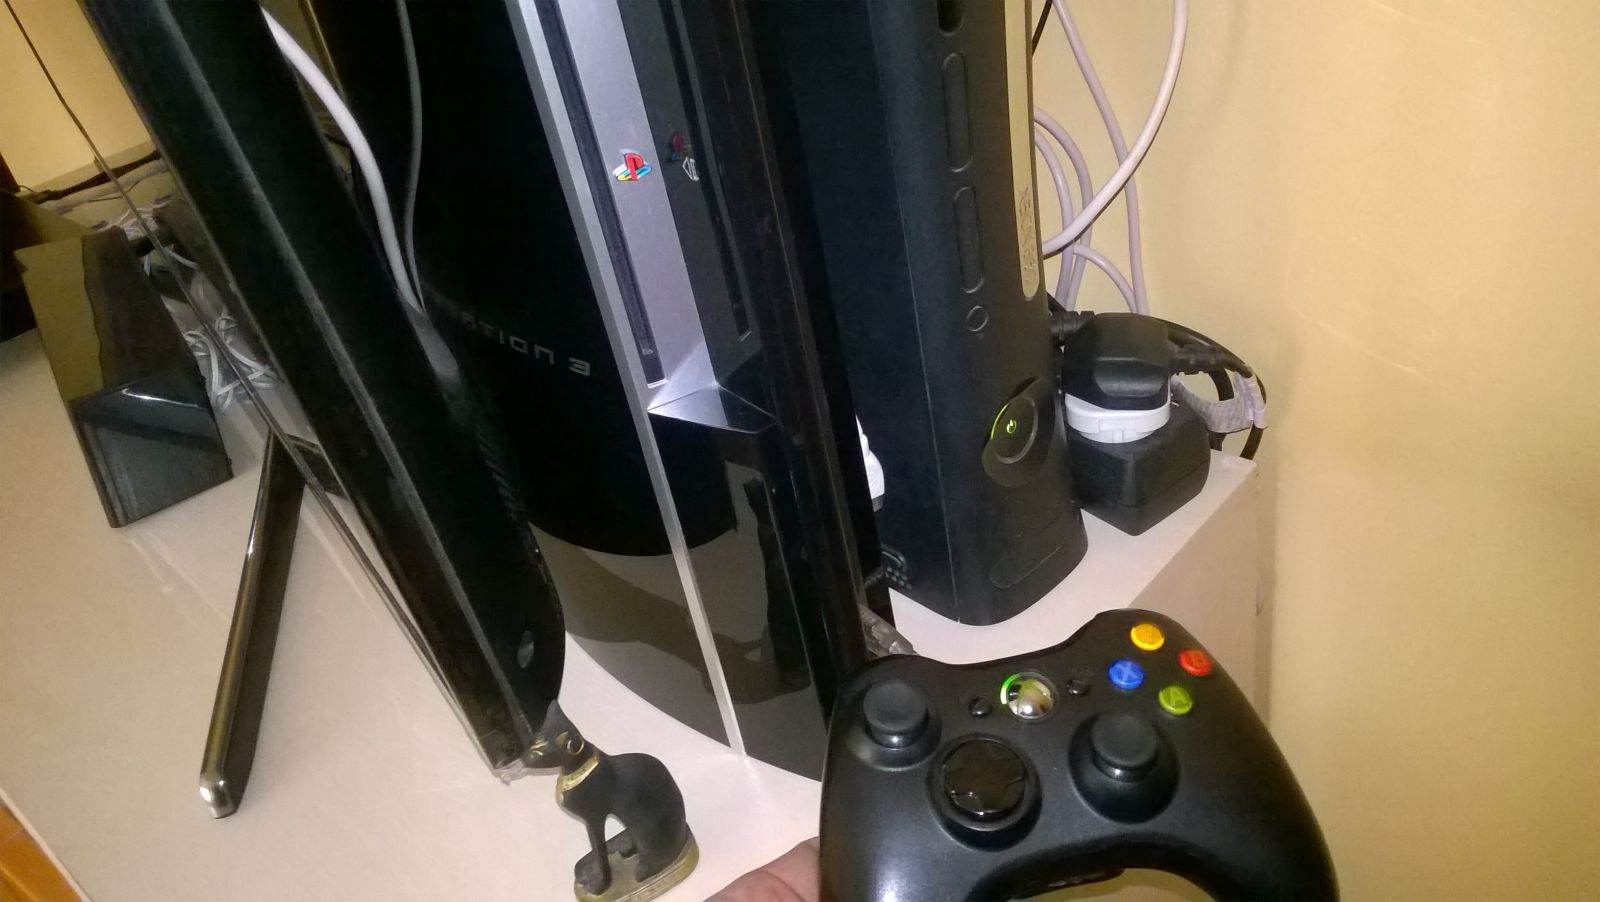 Xbox-360 in work...